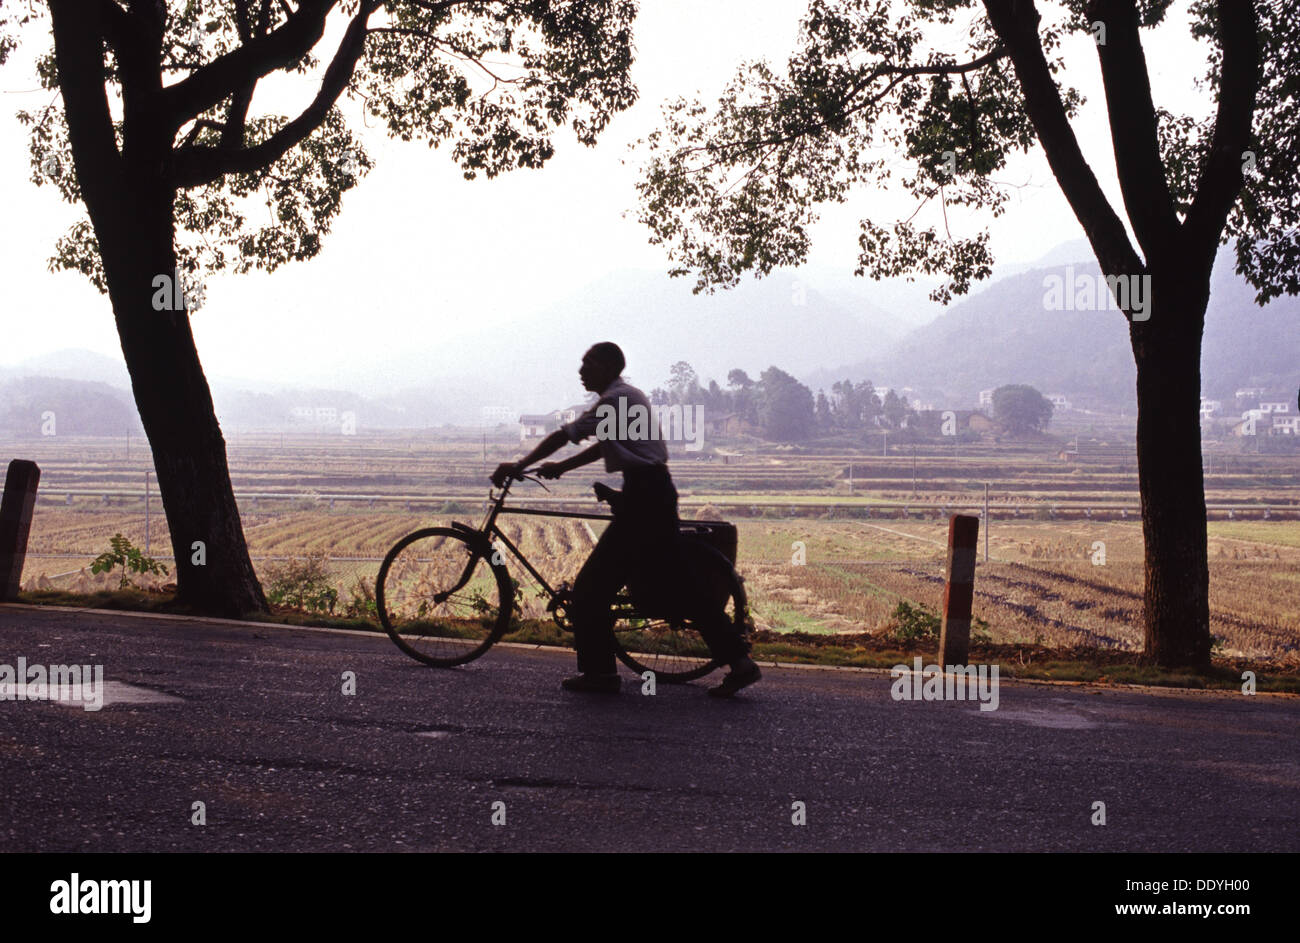 Chinese man walks with his bicycle in Shaoshan county level city in Xiangtan, Hunan Province, noted as the birthplace of Mao Zedong China Stock Photo